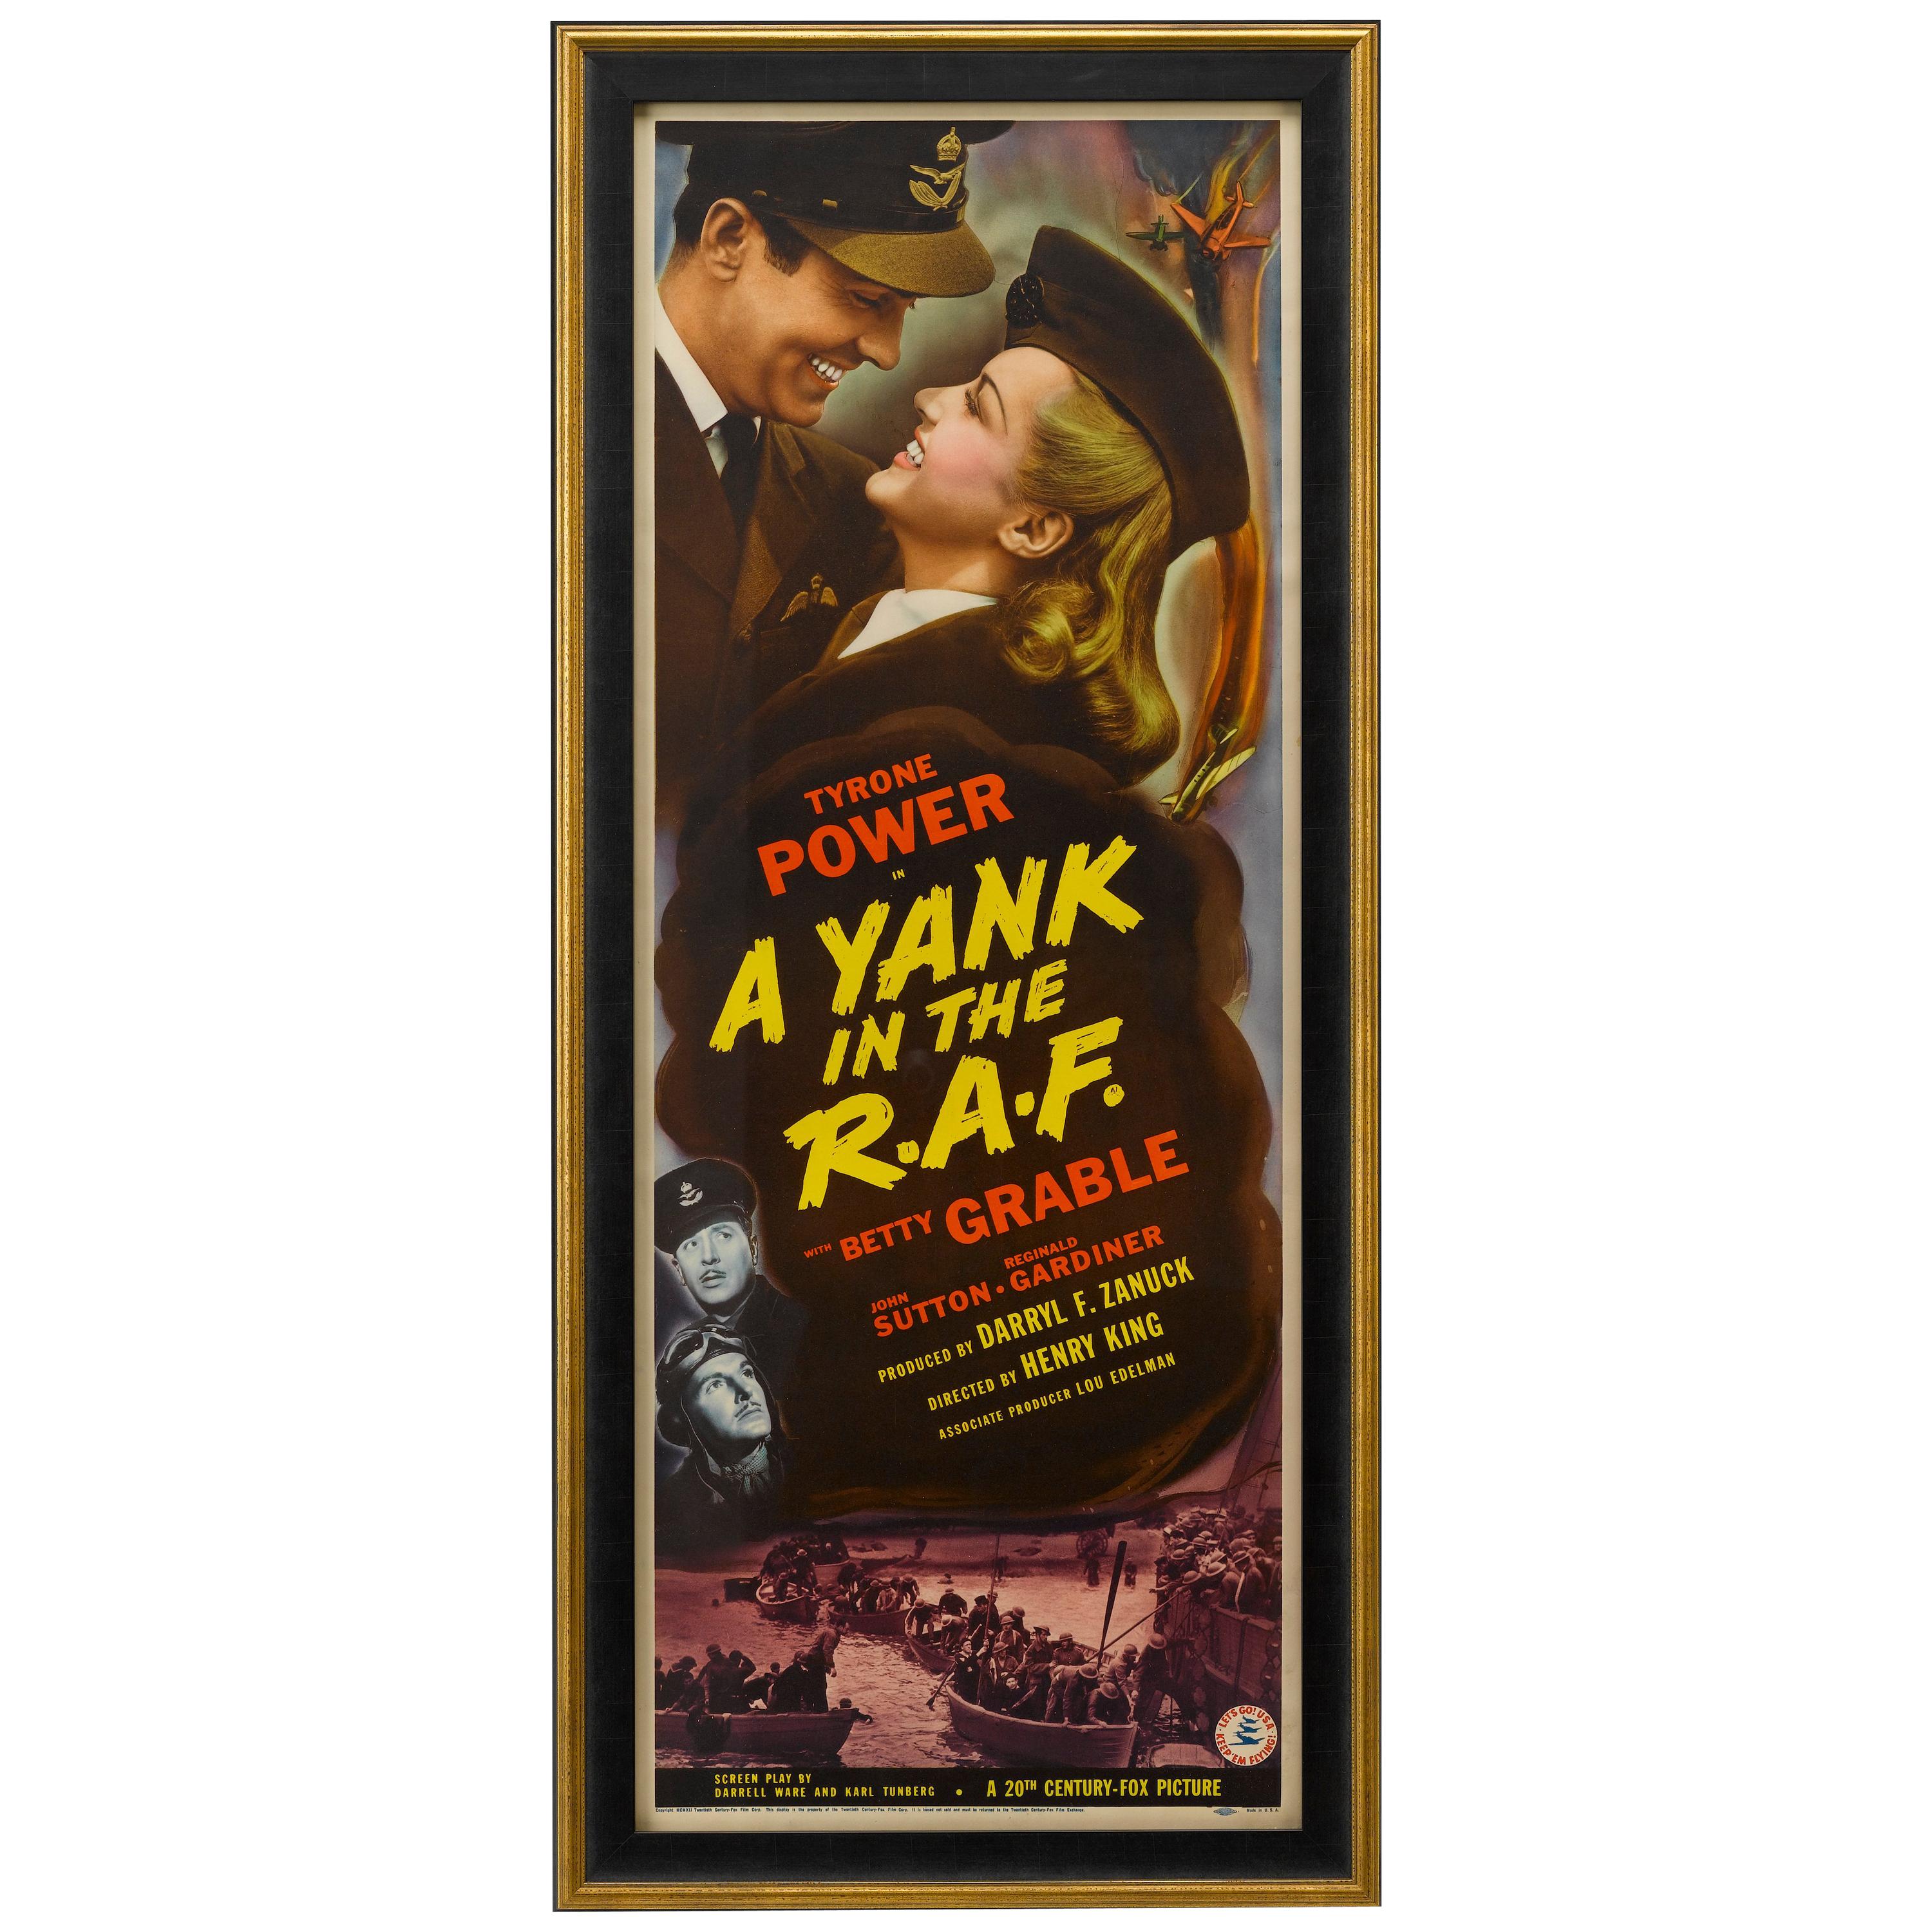 "A Yank in the R.A.F." Vintage Movie Poster, Circa 1941 For Sale